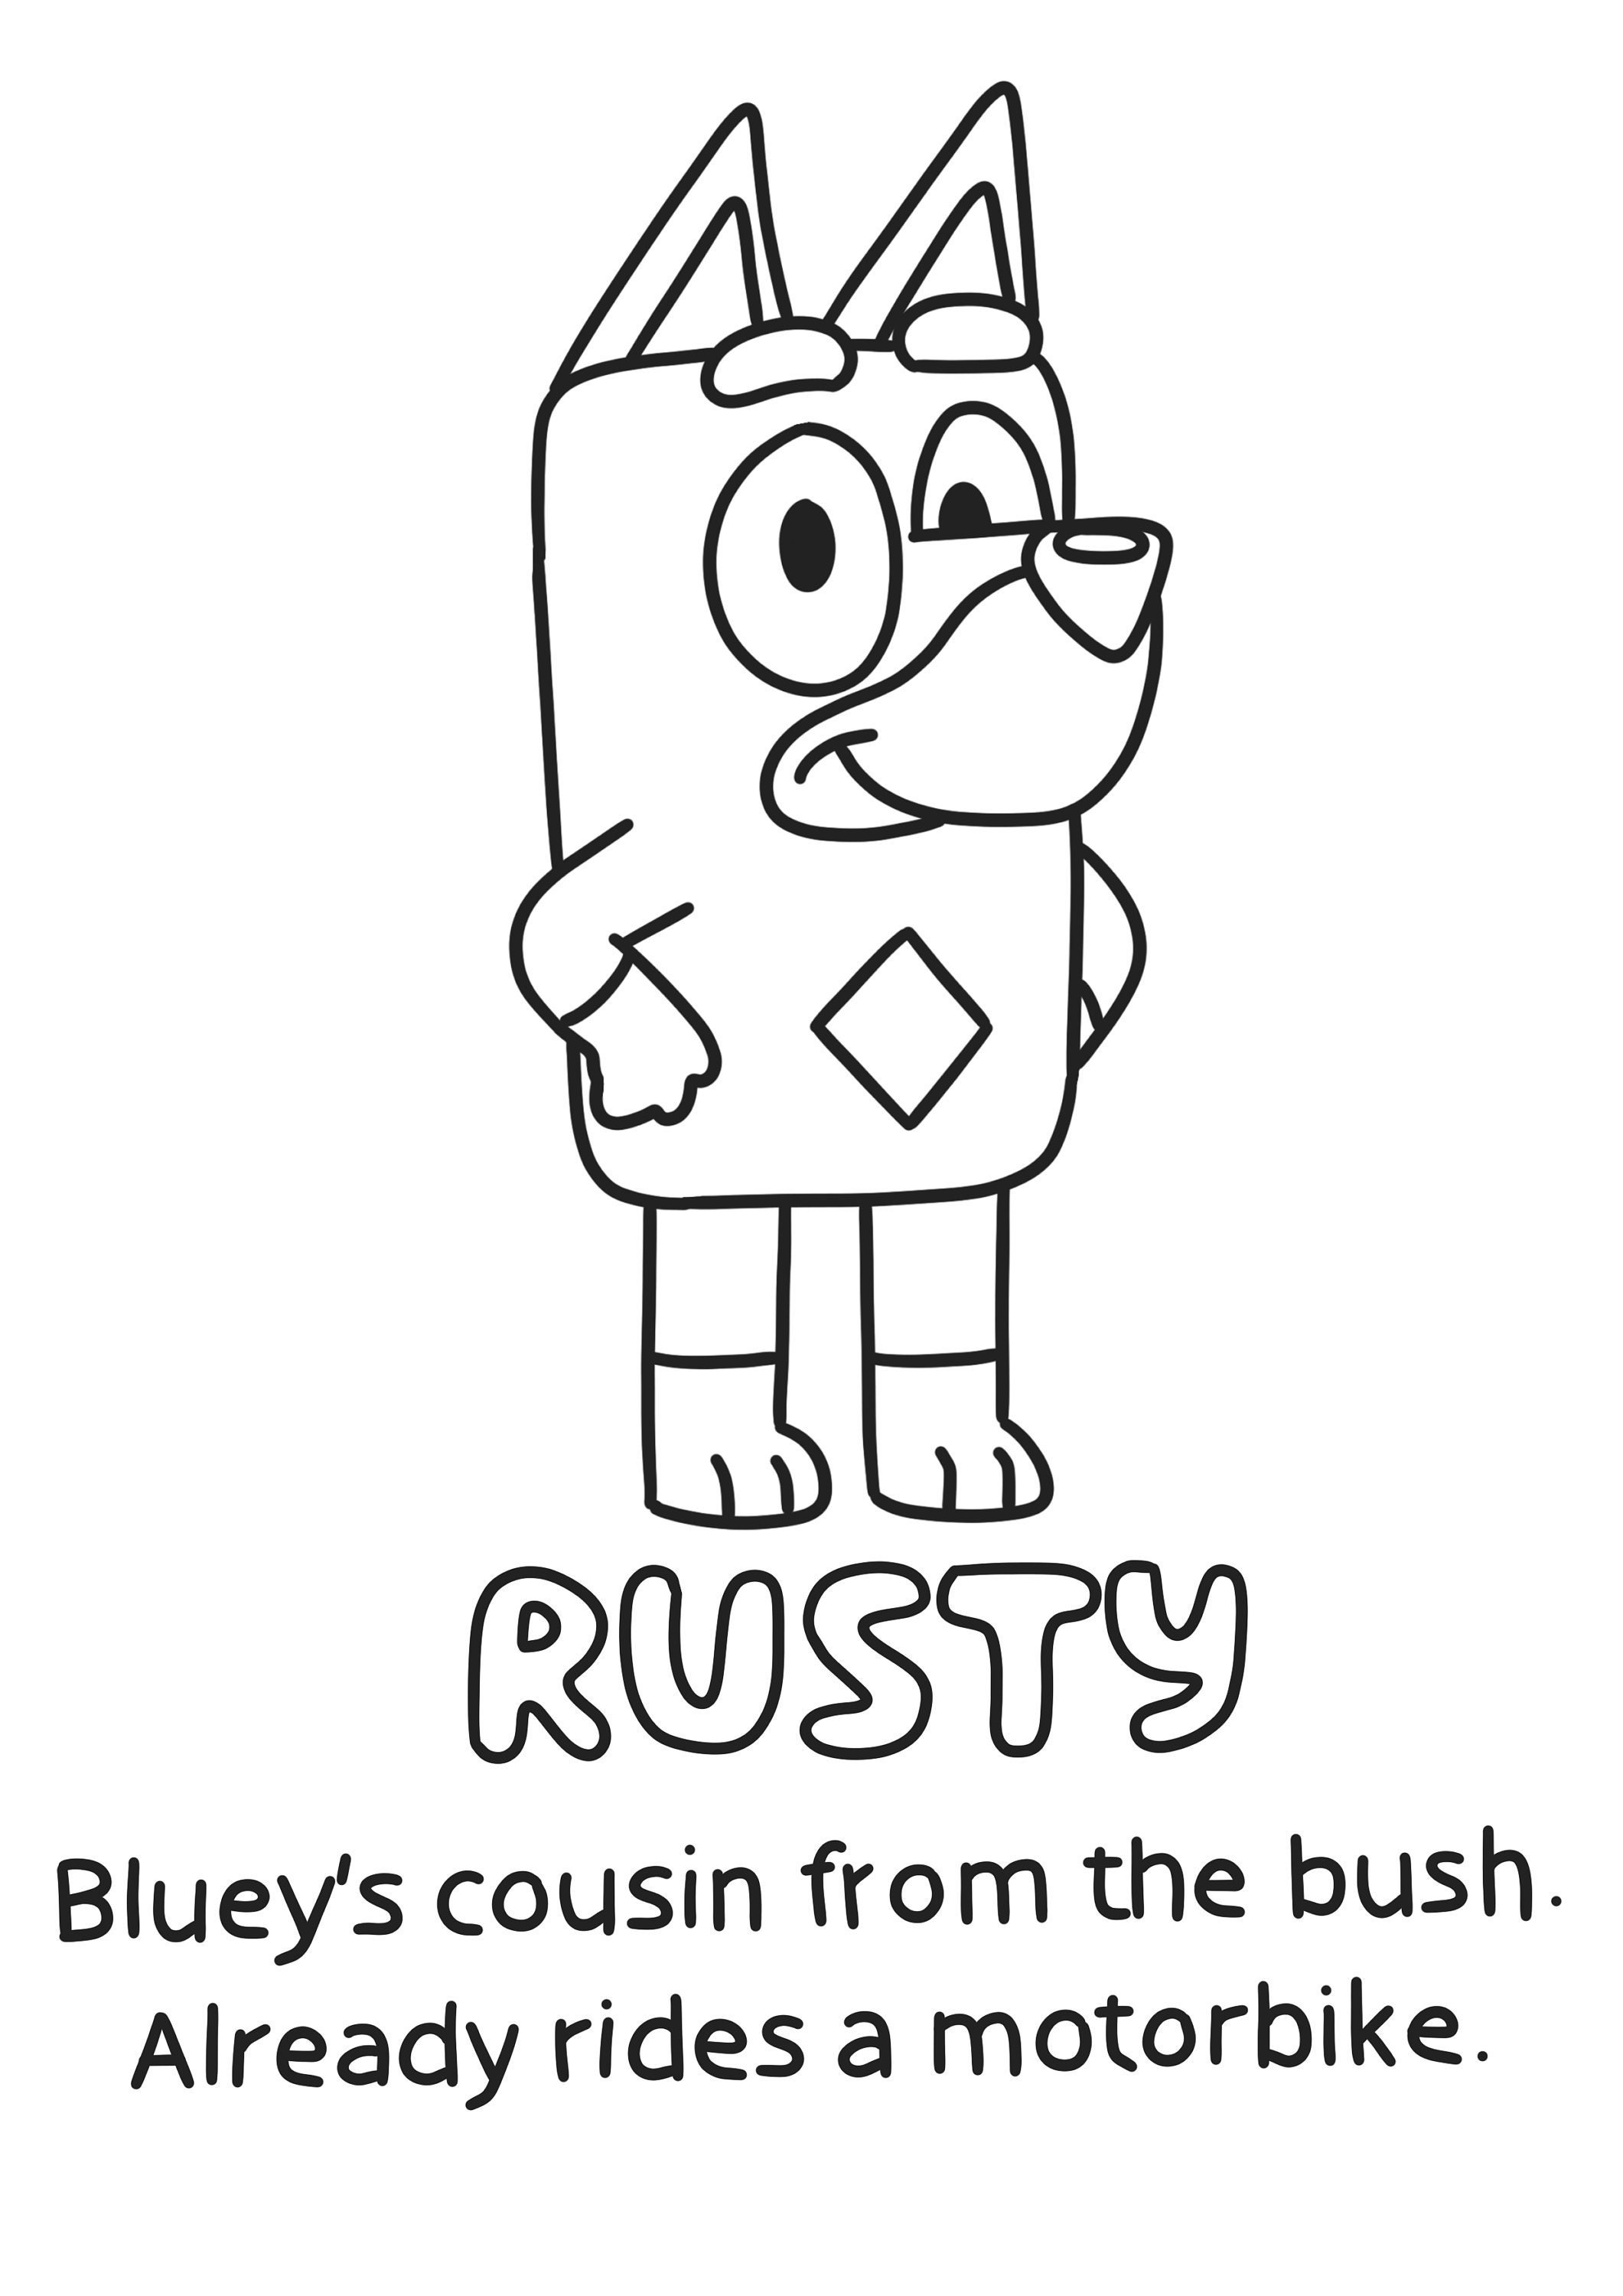 Rusty Colouring Page Bluey - Etsy